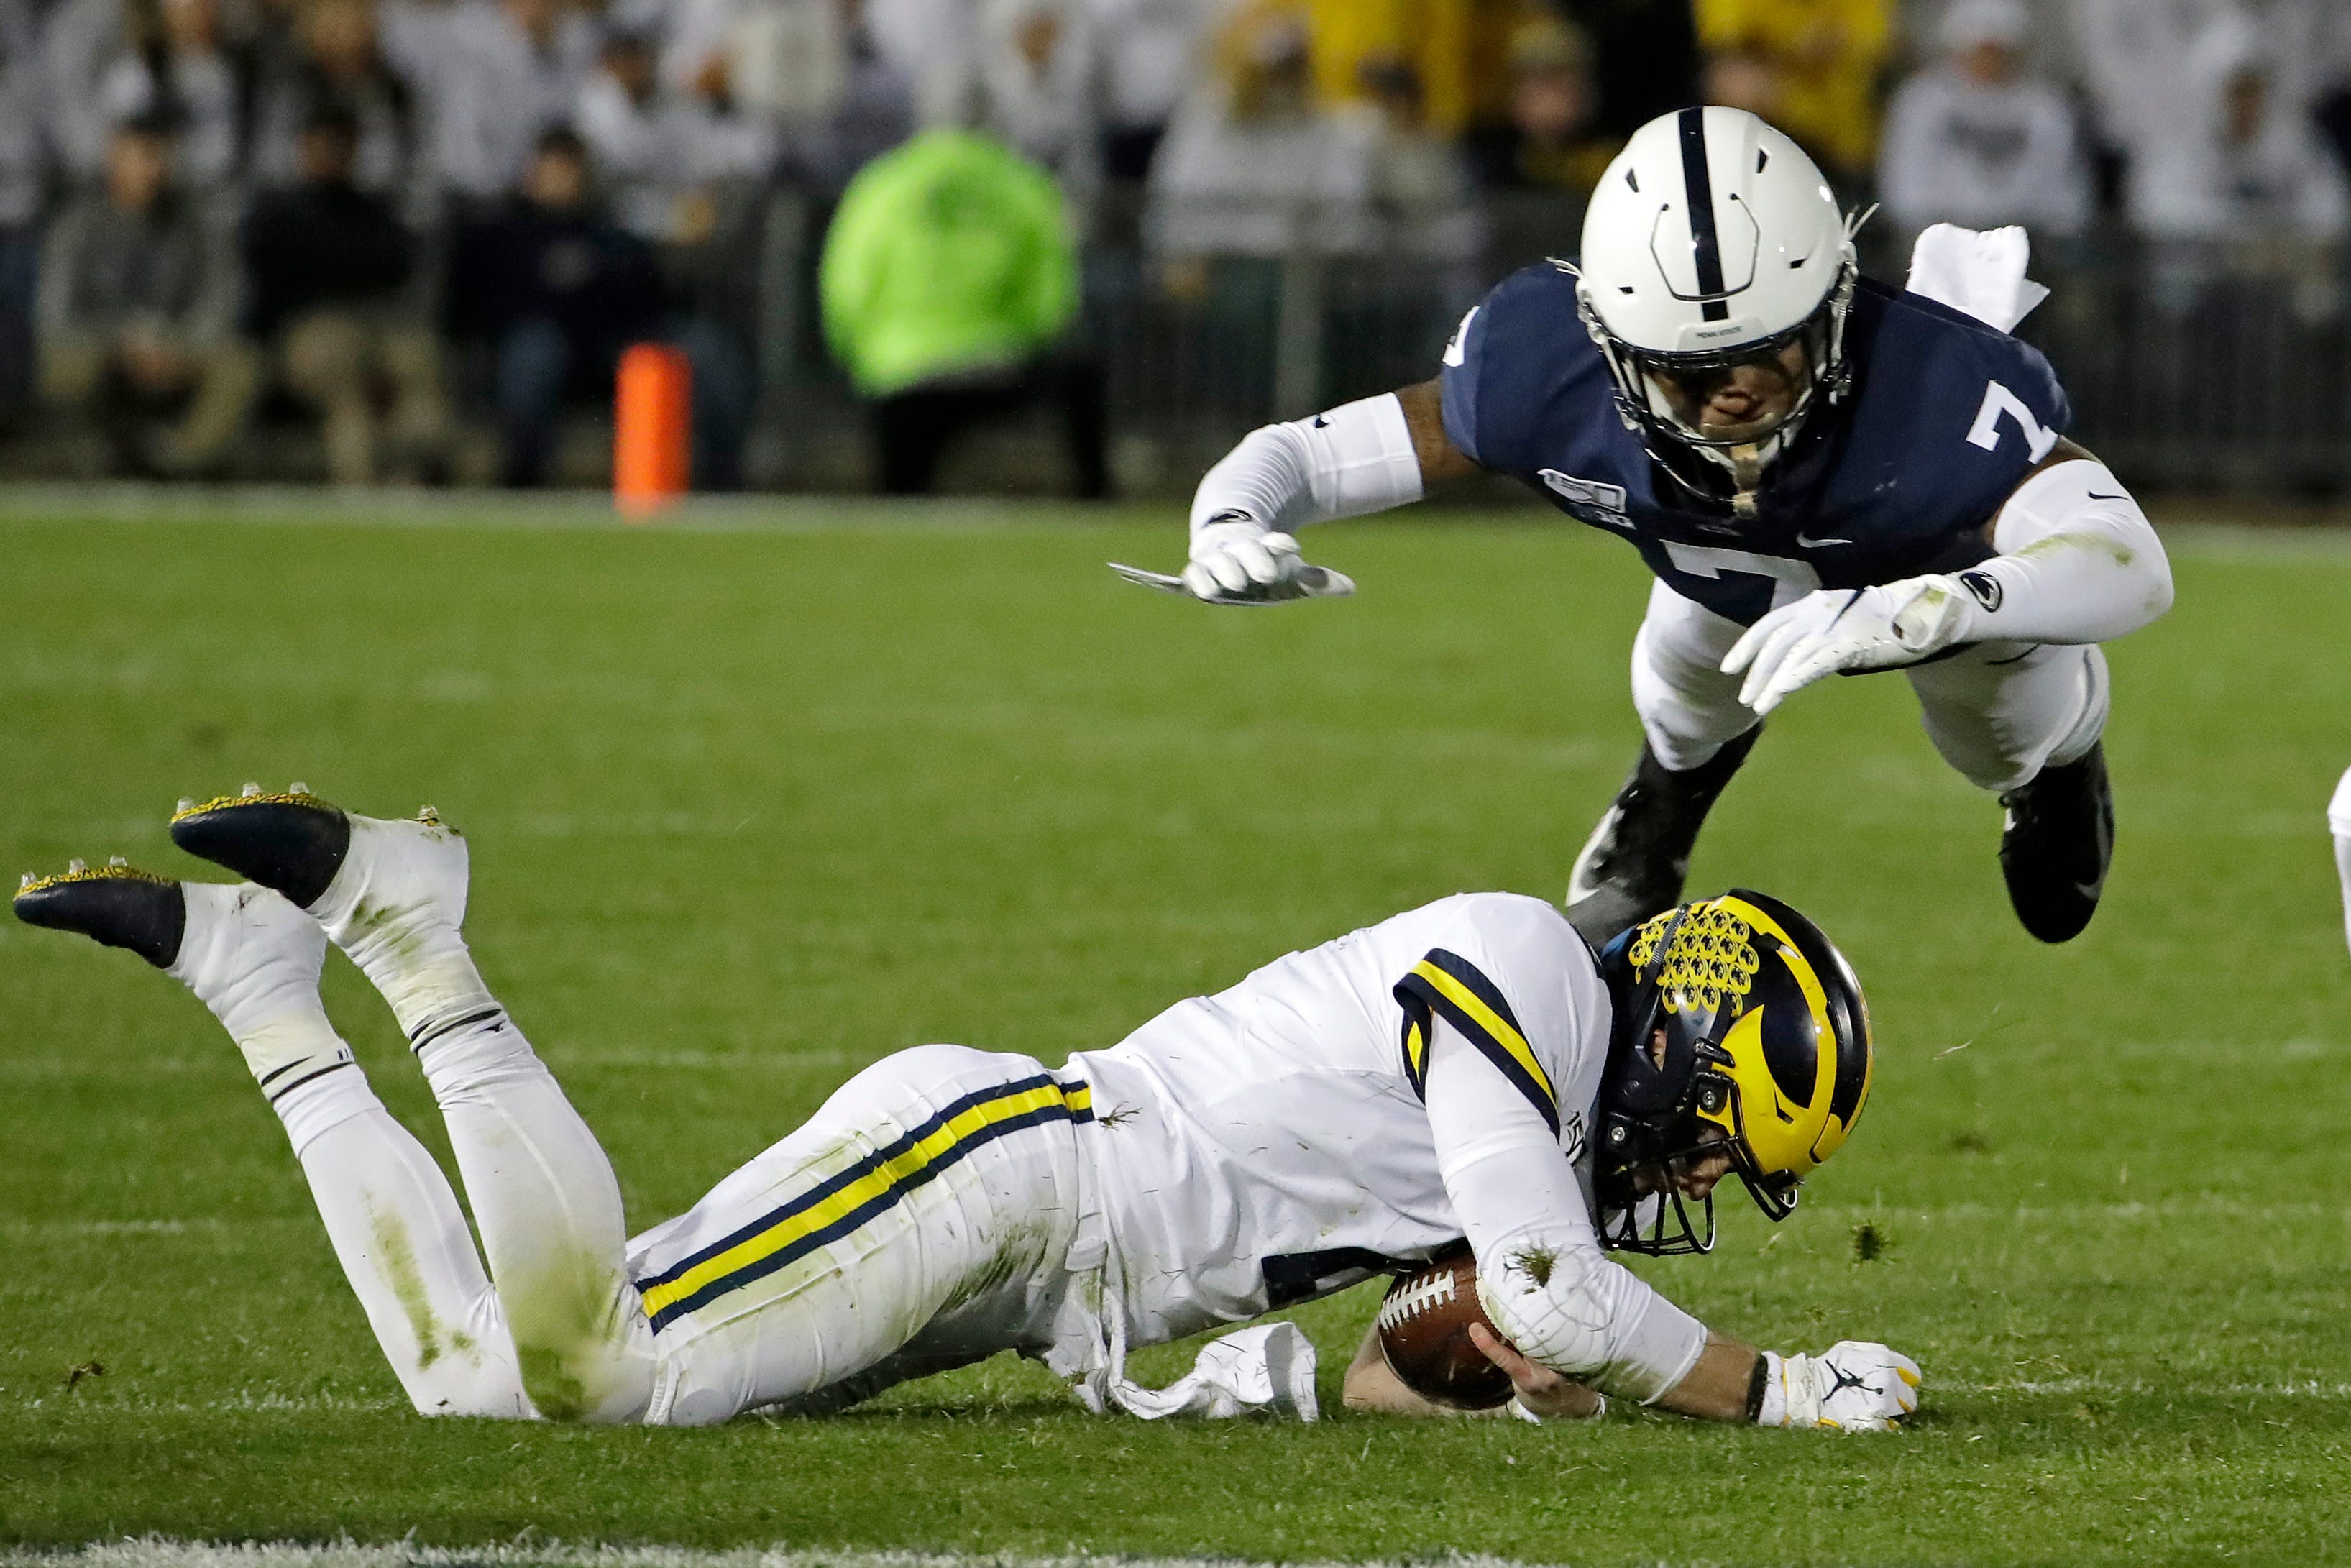 Penn State safety Jaquan Brisker (7) leaps to avoid a sliding Michigan quarterback Shea Patterson at the end of a scramble for a first down during the first half.